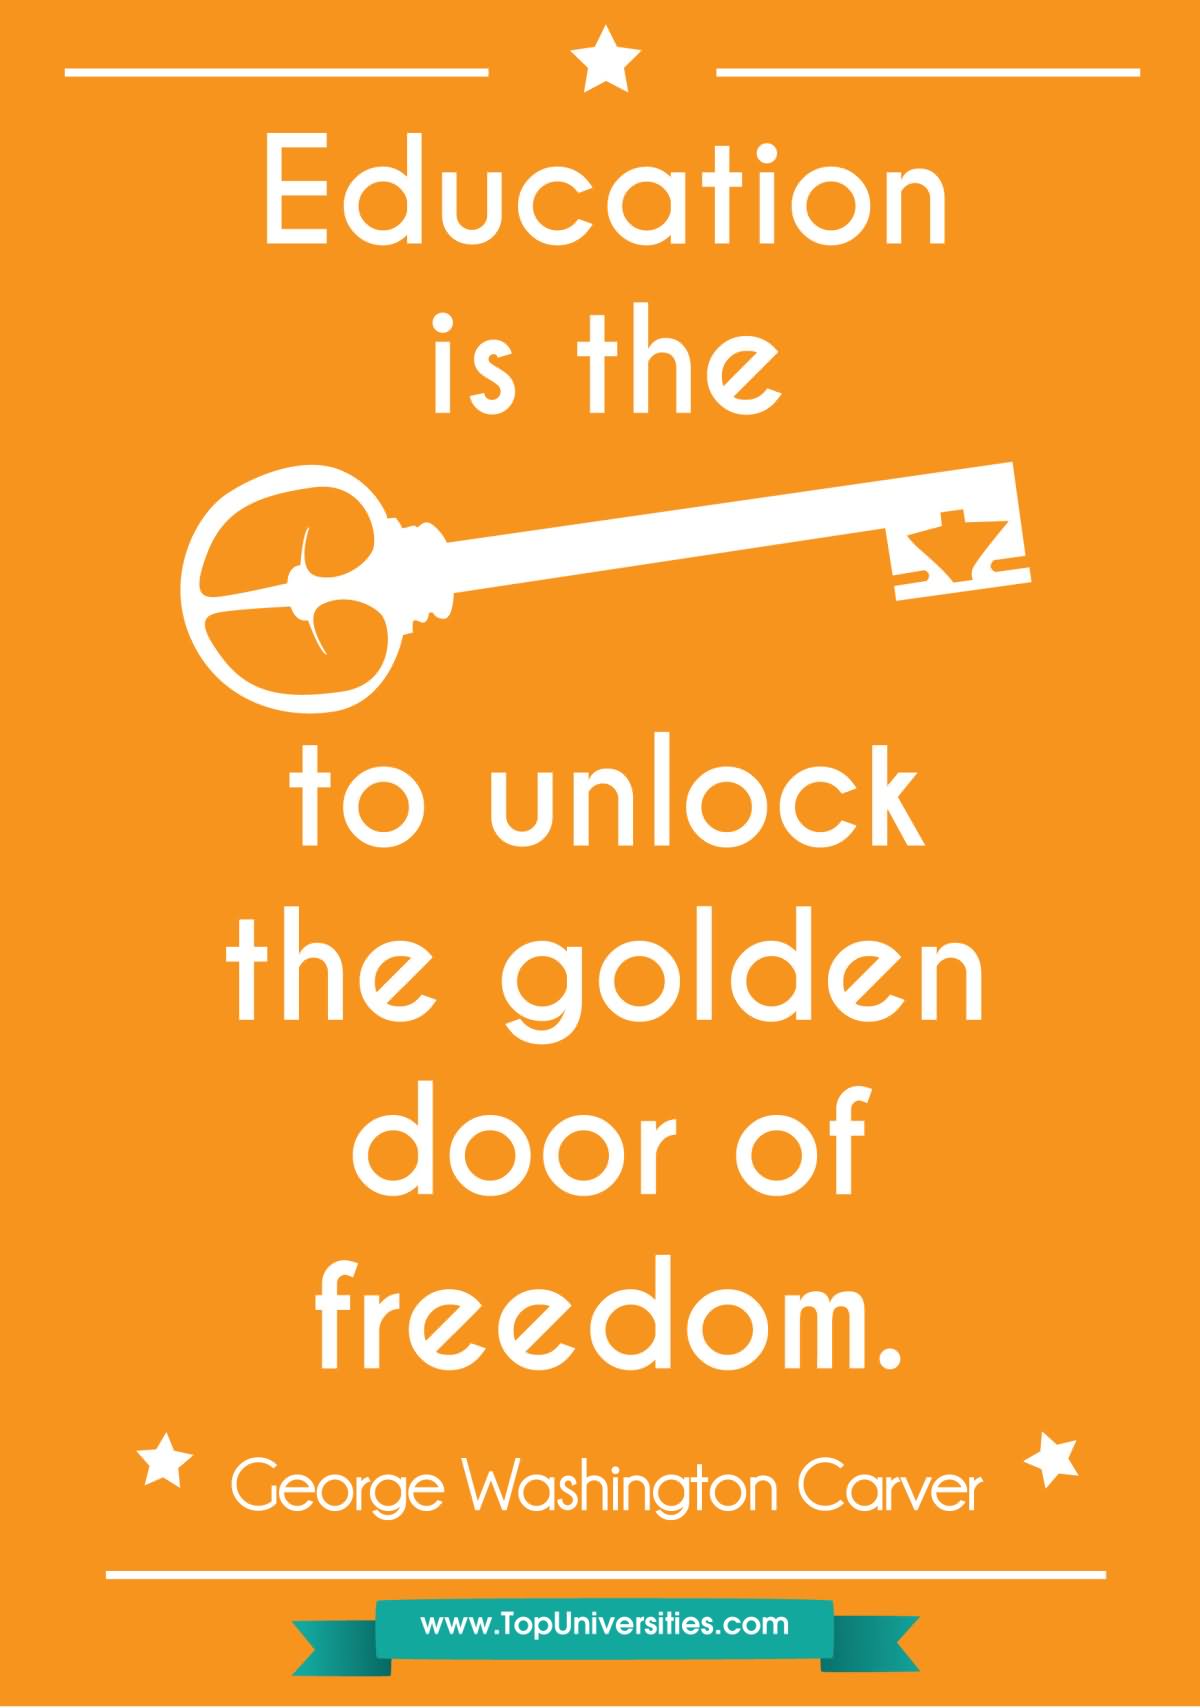 Education is the key to unlock the golden door of freedom. - George Washington Carver